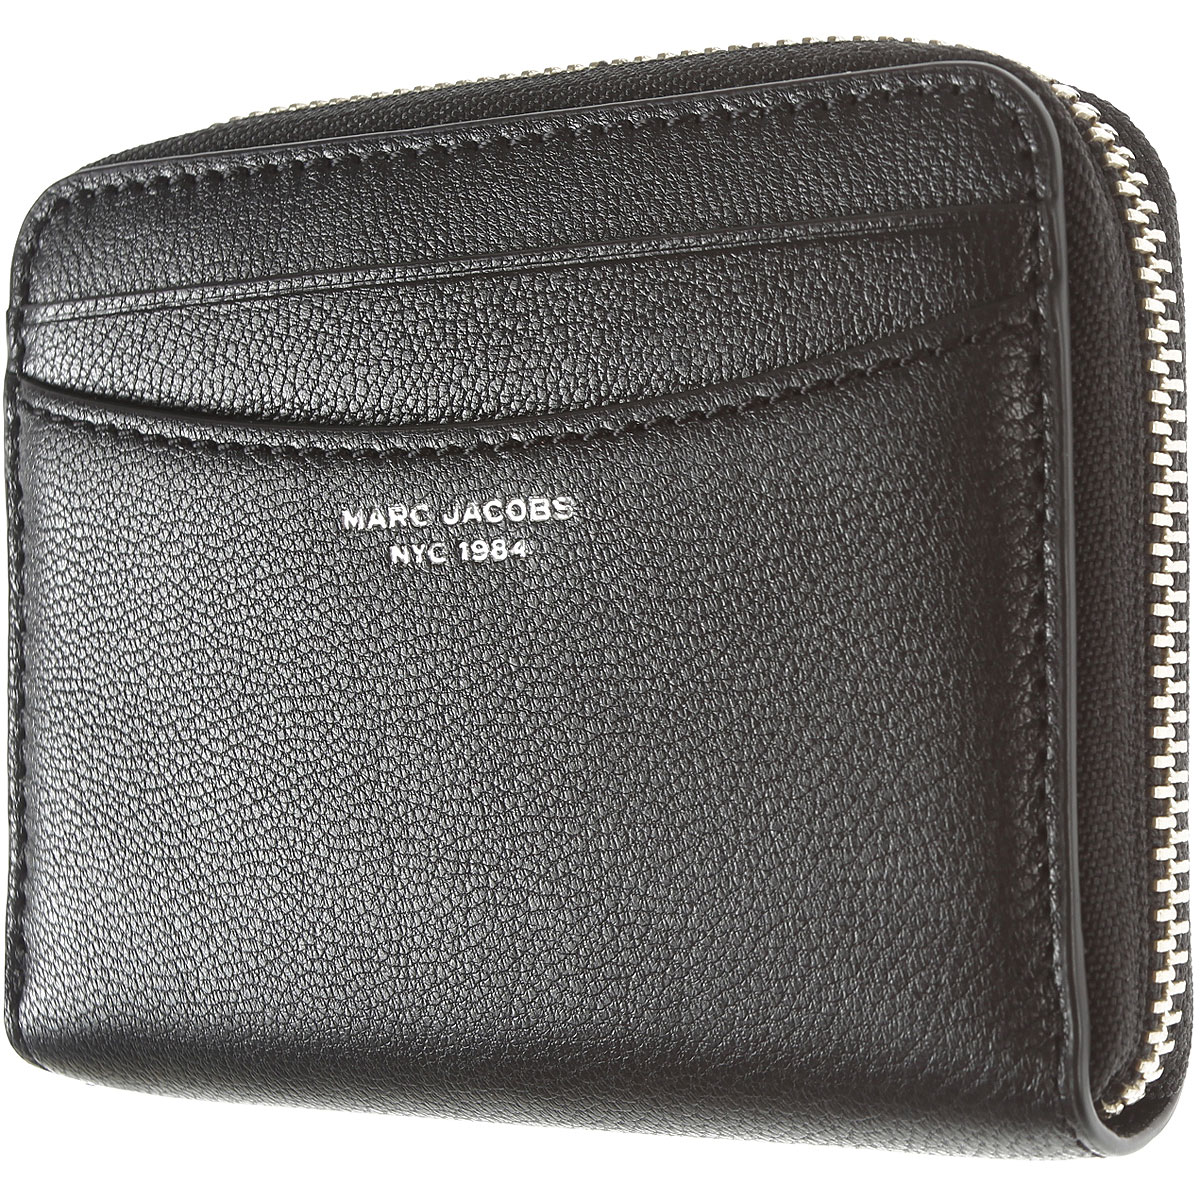 Womens Wallets Marc Jacobs, Style code: s178l03fa22-001-